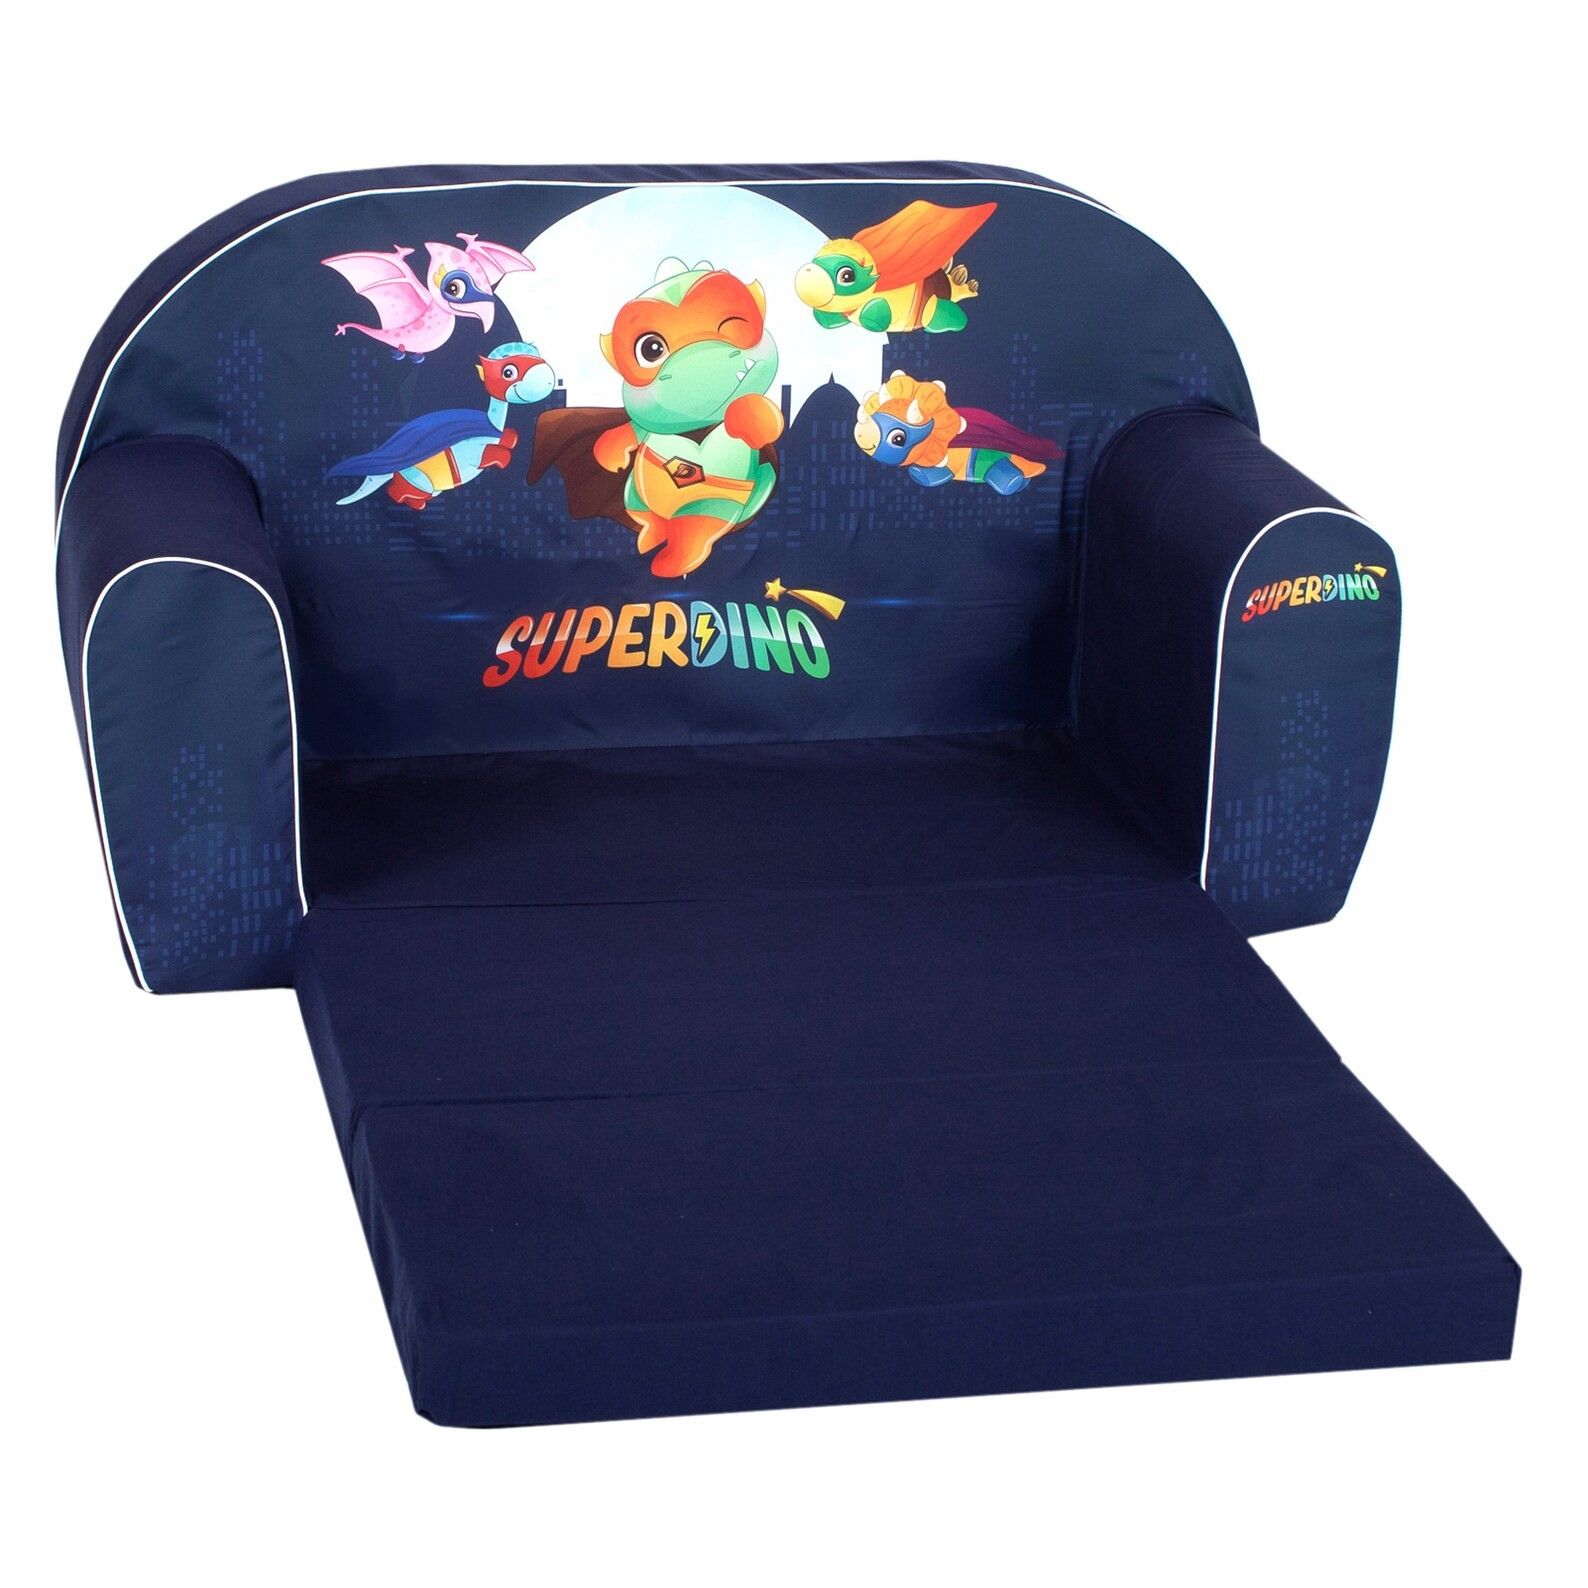 blue couch with fold out cushions and animated superhero dinosaurs on seat back